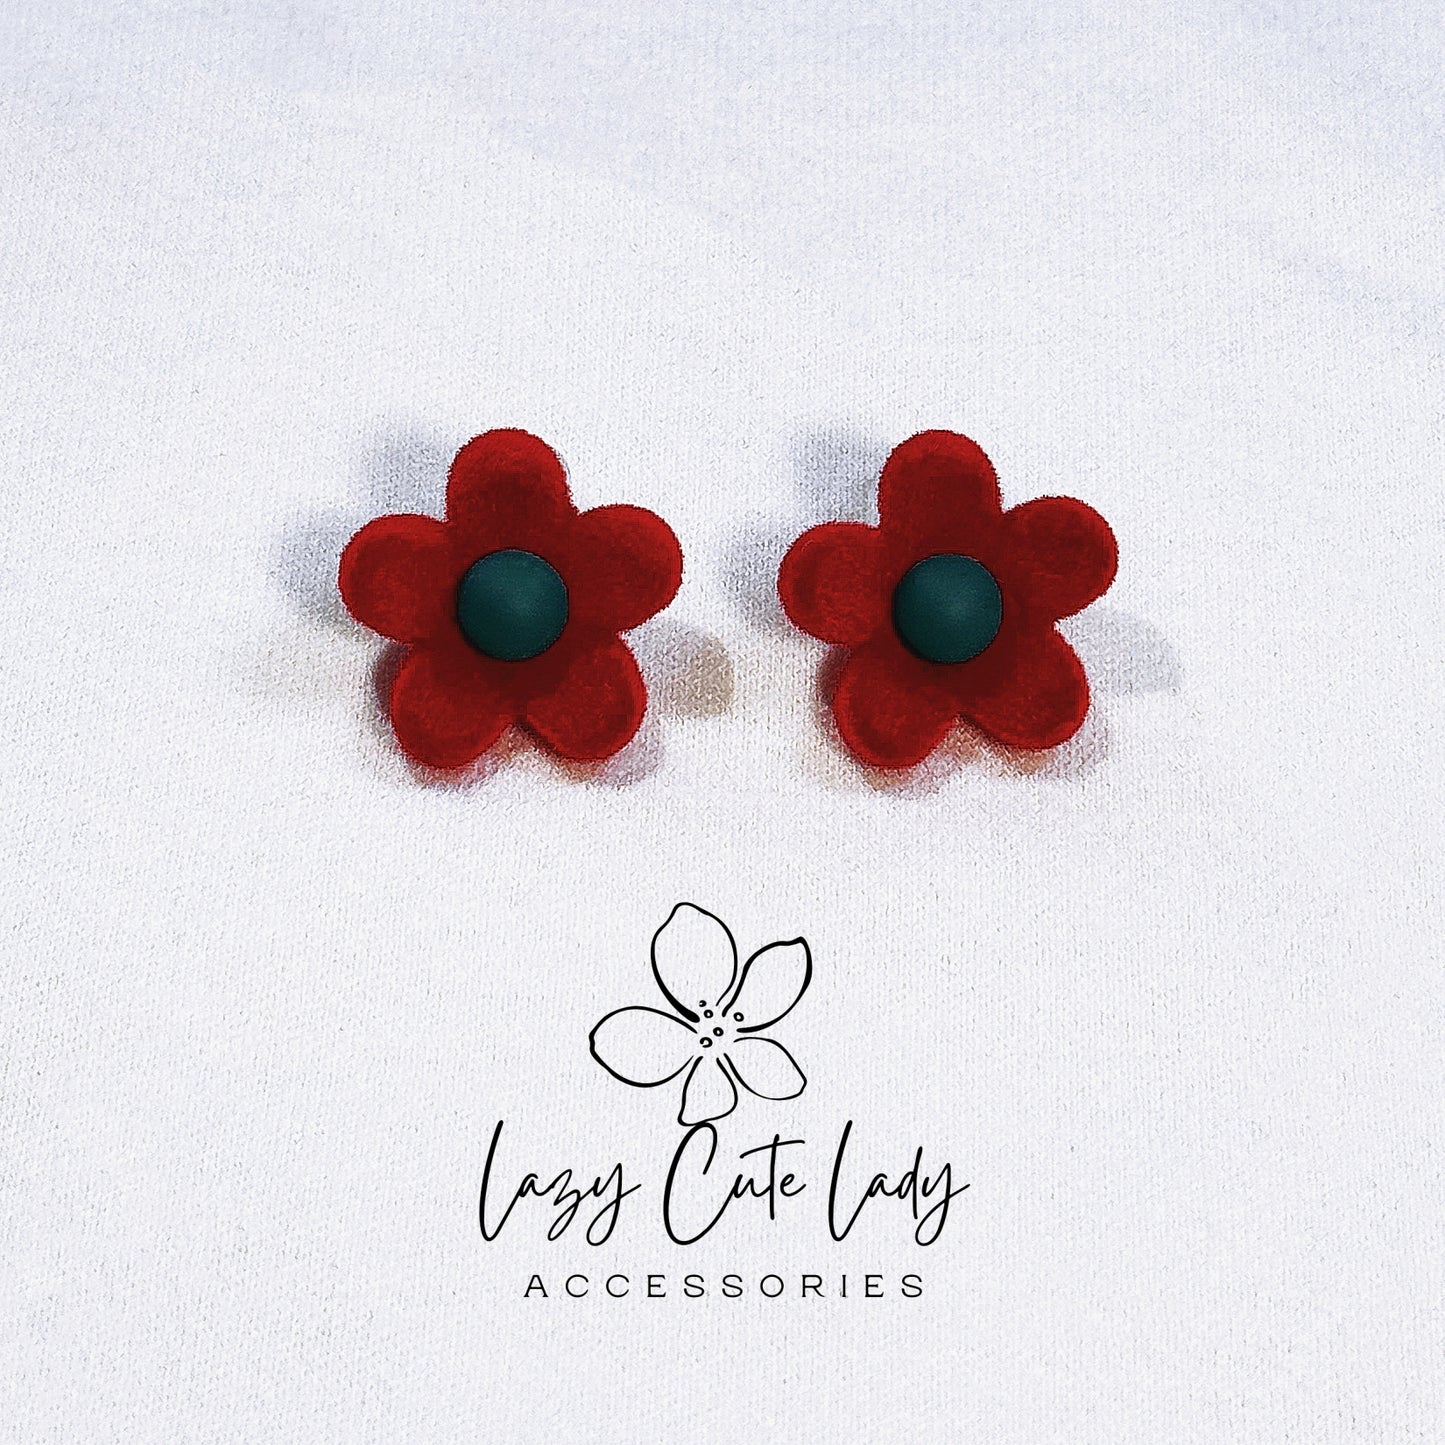 Lazy Cute Lady Accessories-Red Velvet Floral Stud Earrings-Fashion Earring- Fashion Accessories-Gift-for girl for women